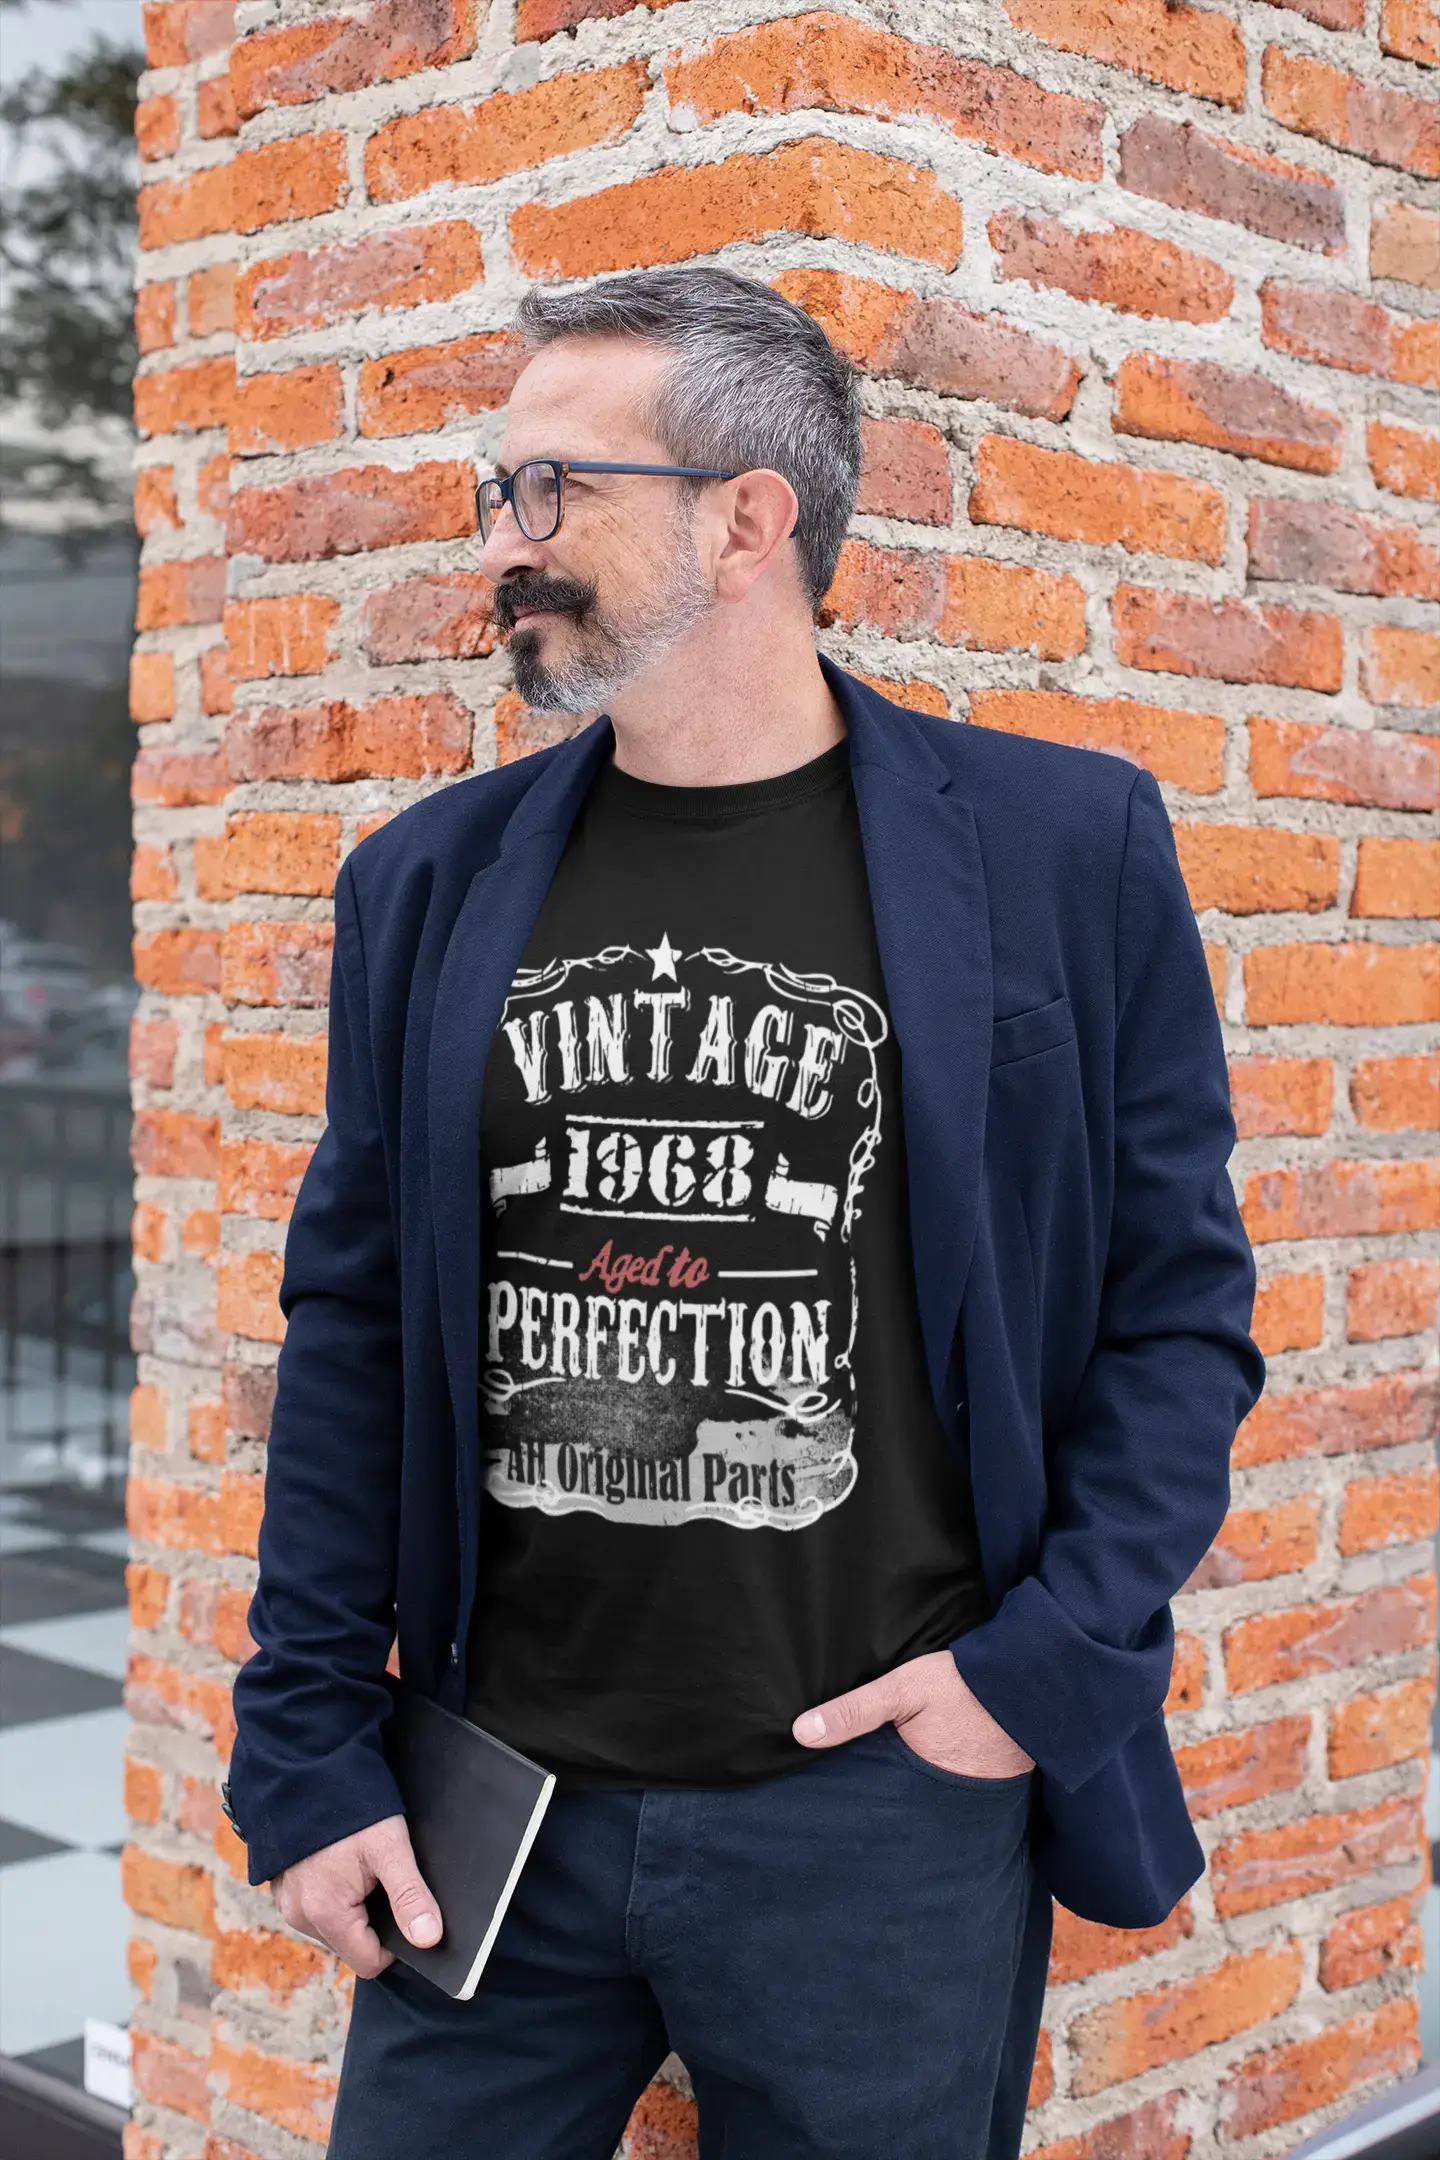 1968 Vintage Aged to Perfection Men's T-shirt Black Birthday Gift 00490